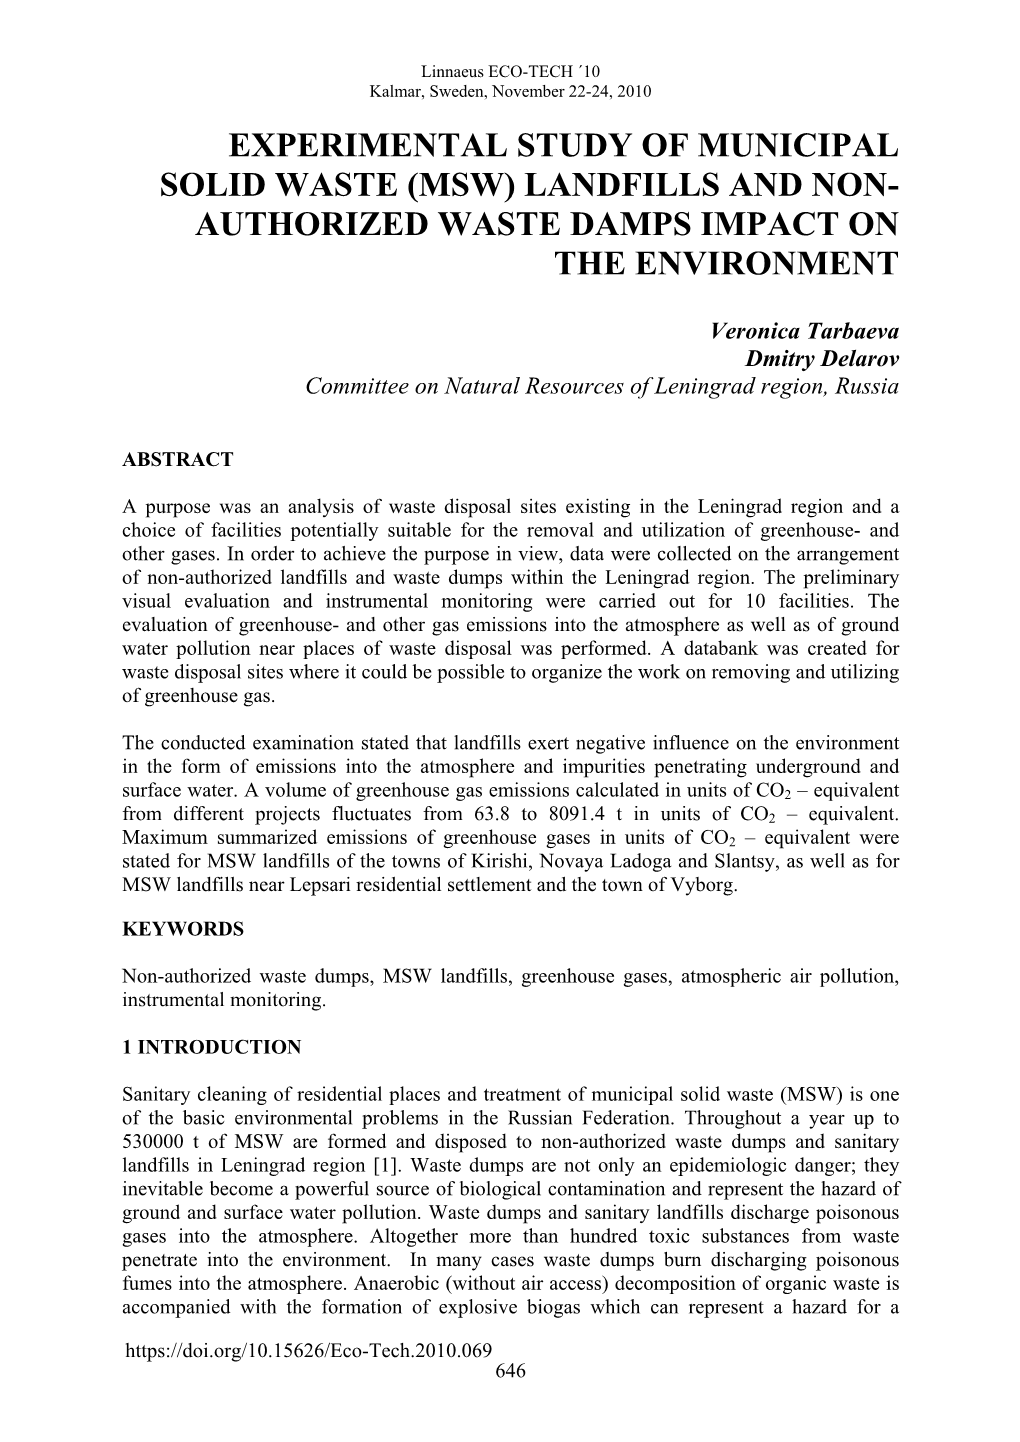 Experimental Study of Municipal Solid Waste (Msw) Landfills and Non- Authorized Waste Damps Impact on the Environment